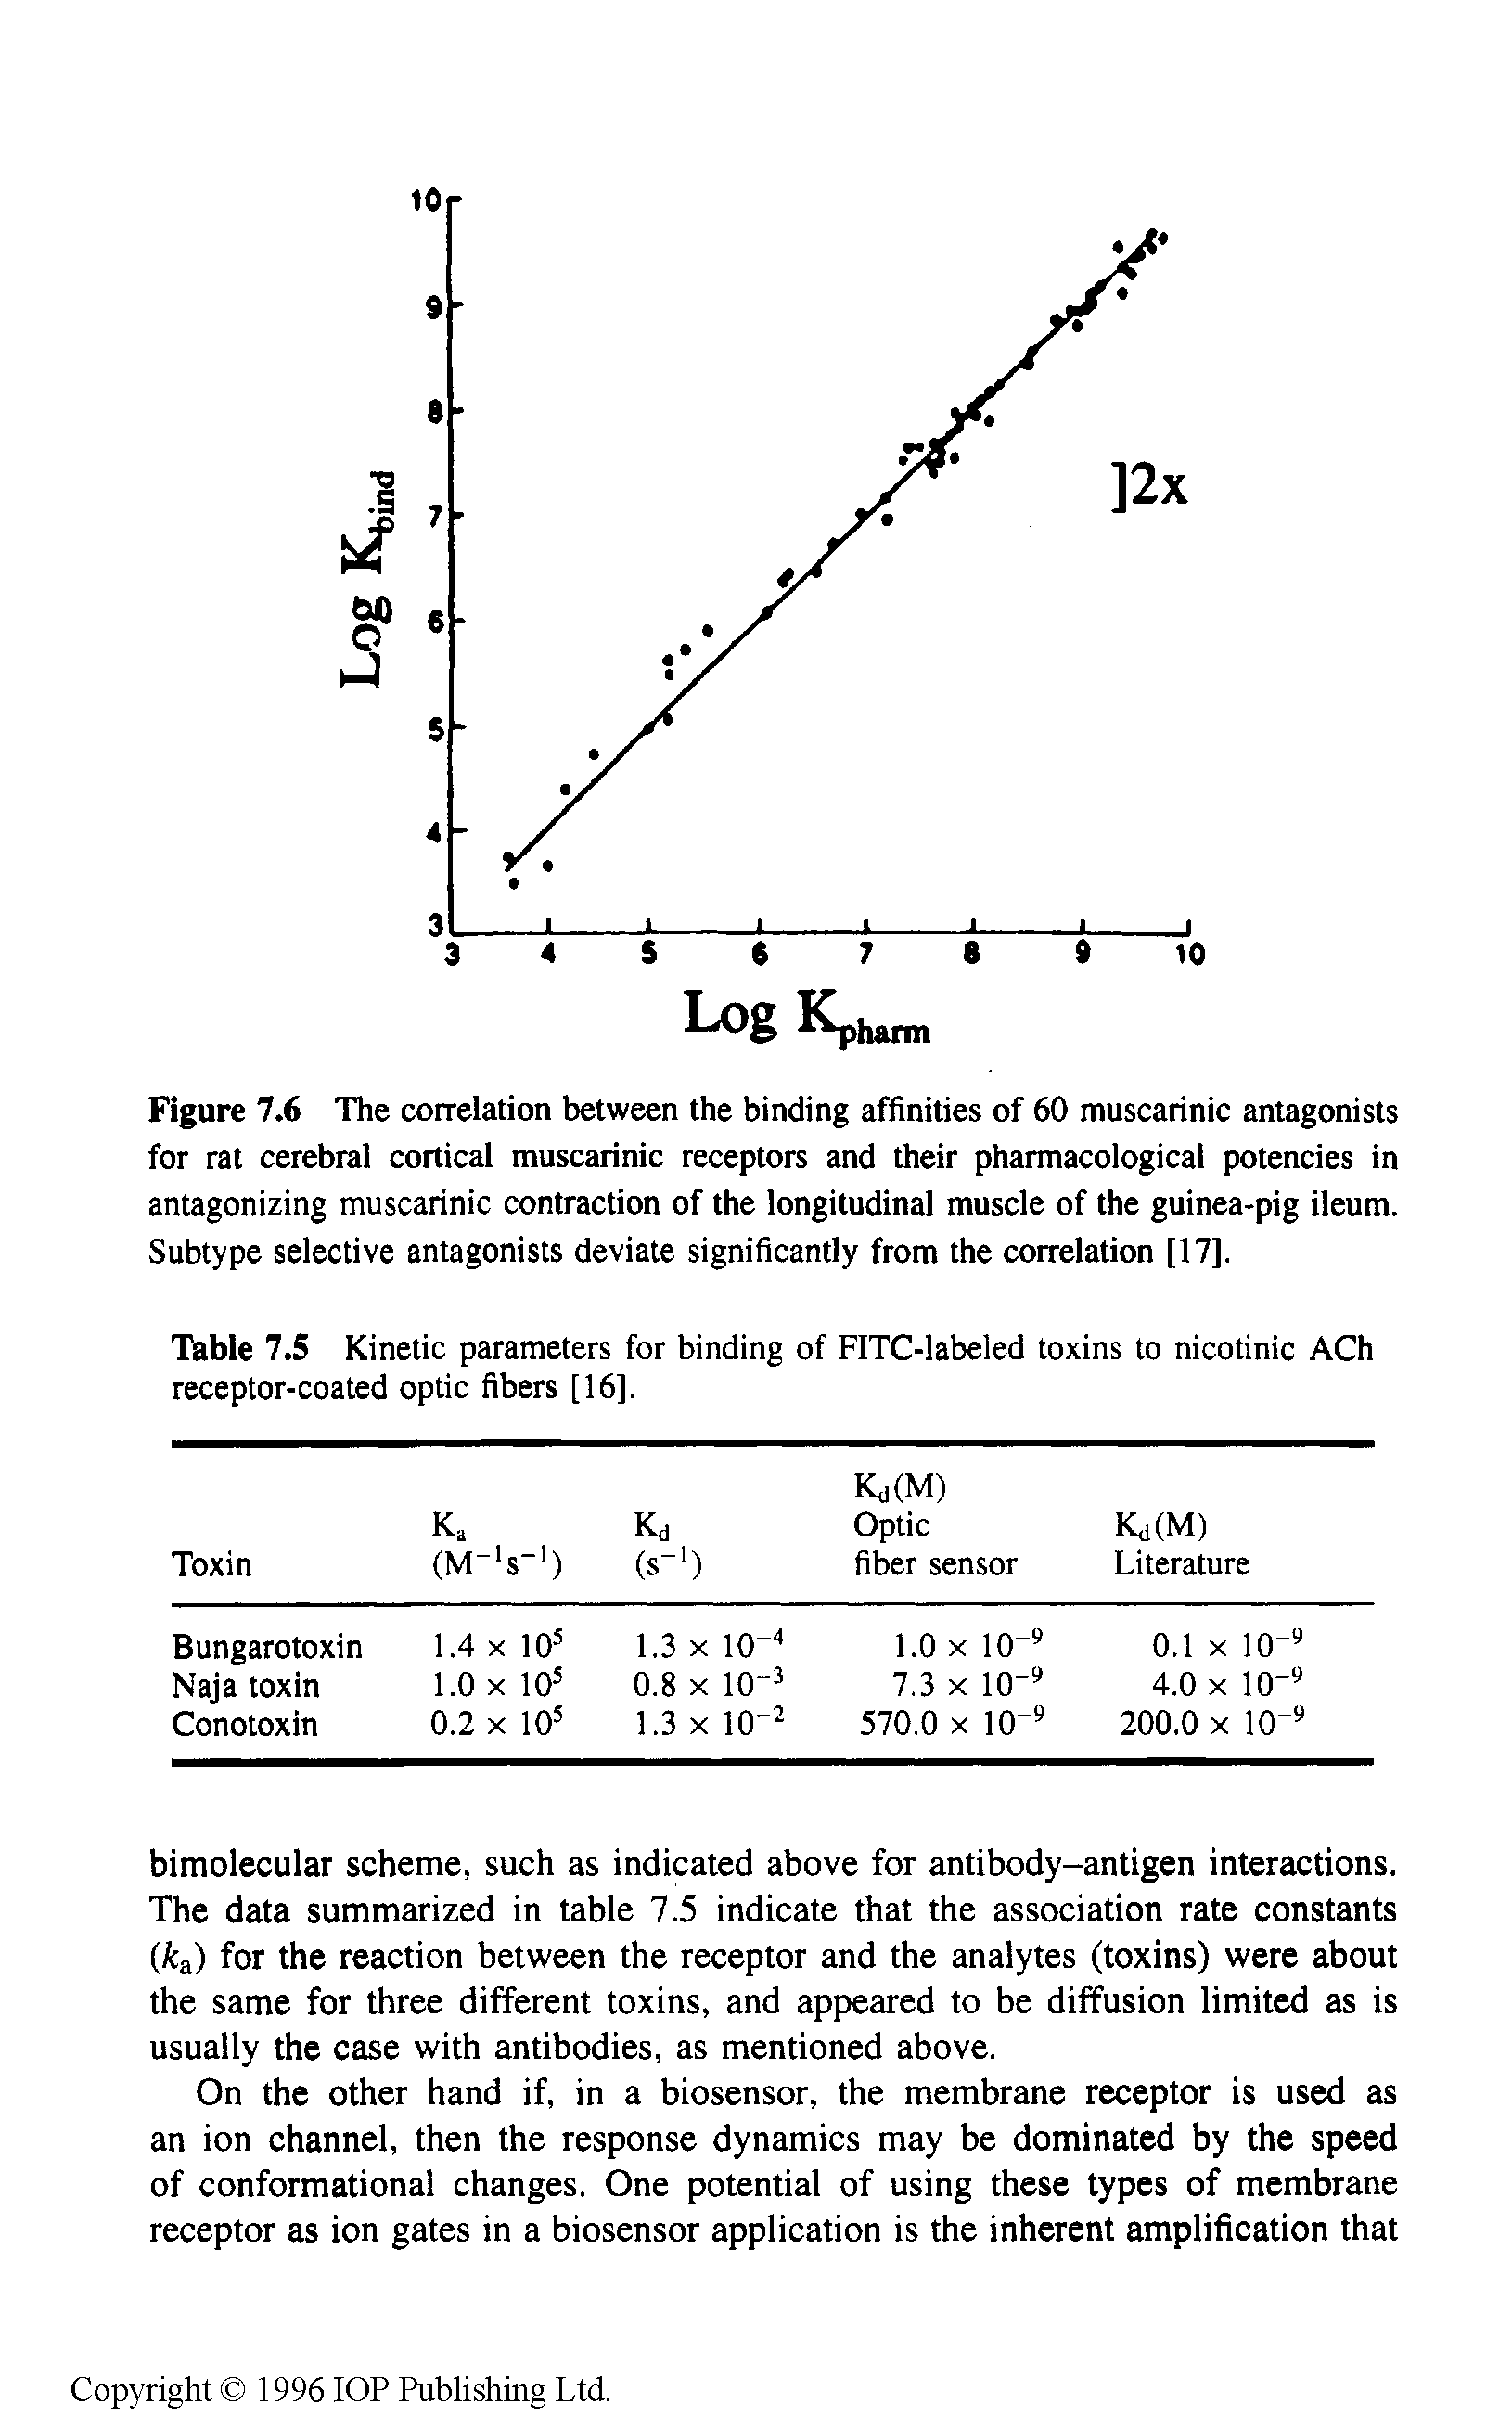 Table 7.5 Kinetic parameters for binding of FITC-labeled toxins to nicotinic ACh receptor-coated optic fibers [16],...